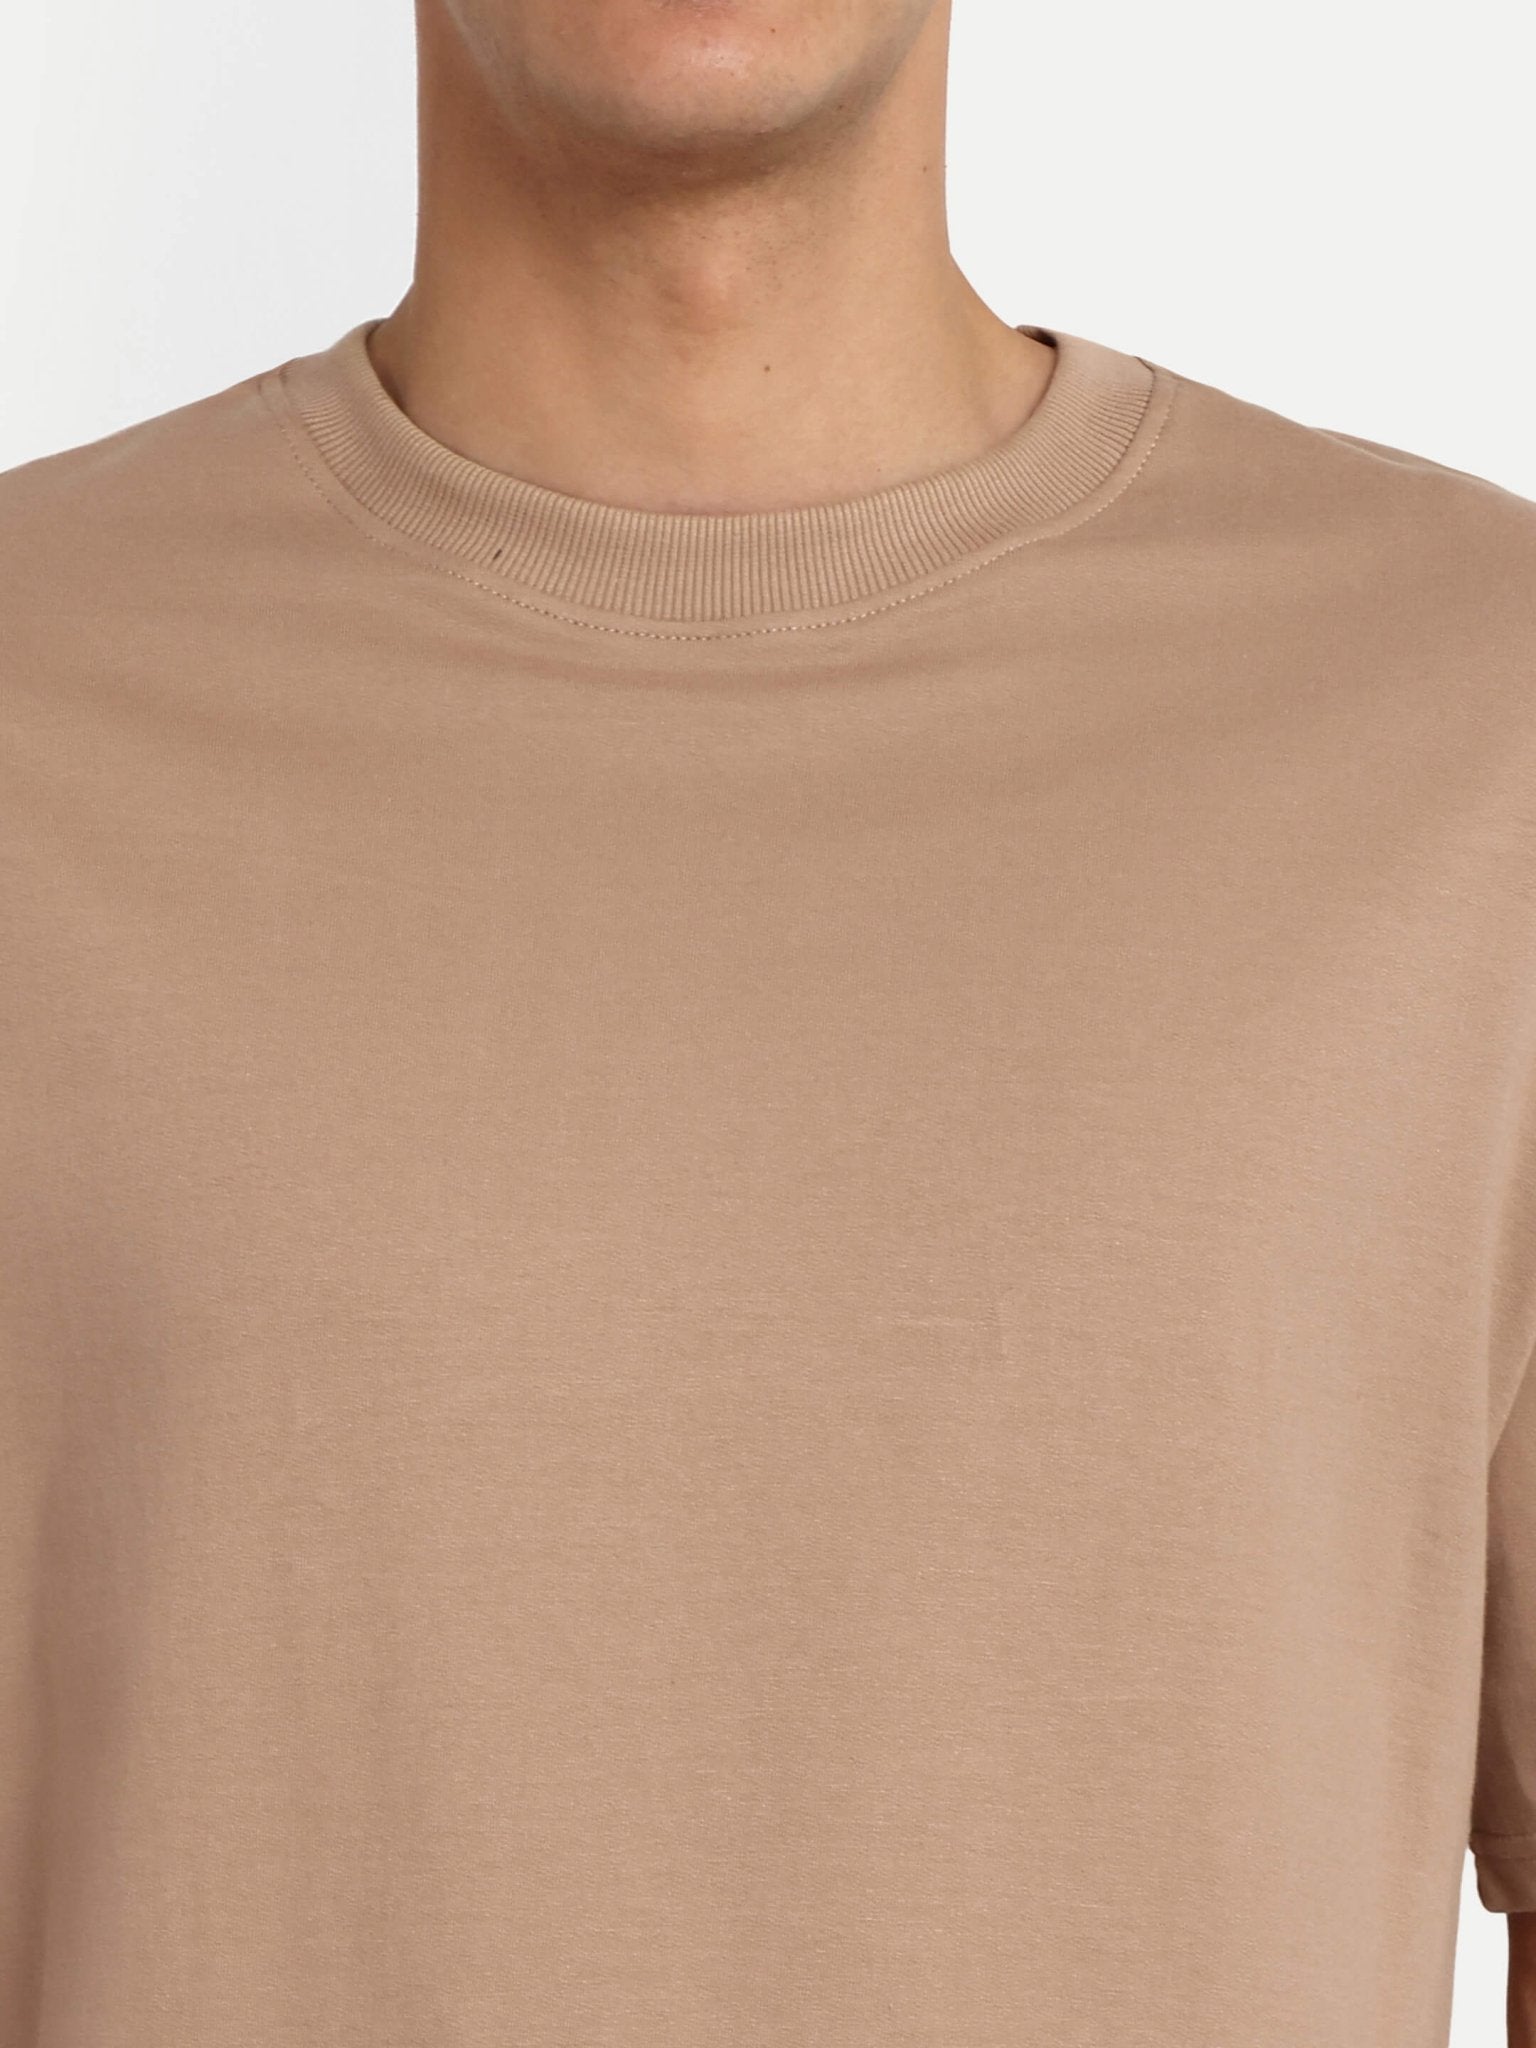 Relaxed Basic T-Shirt - 220 GSM - Beige